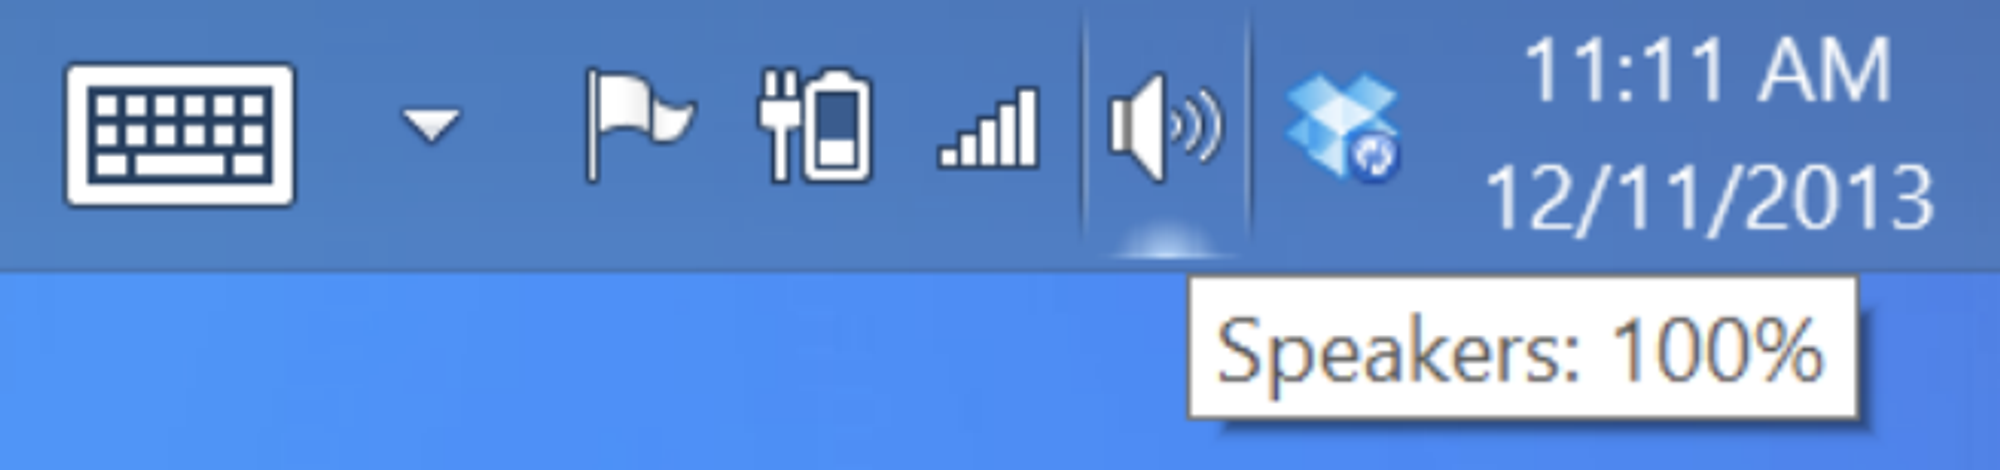 Here, the speaker percentage is hidden underneath a hover state. The speaker icon itself still provides modeless status info, bc it changes based on the level of audio.